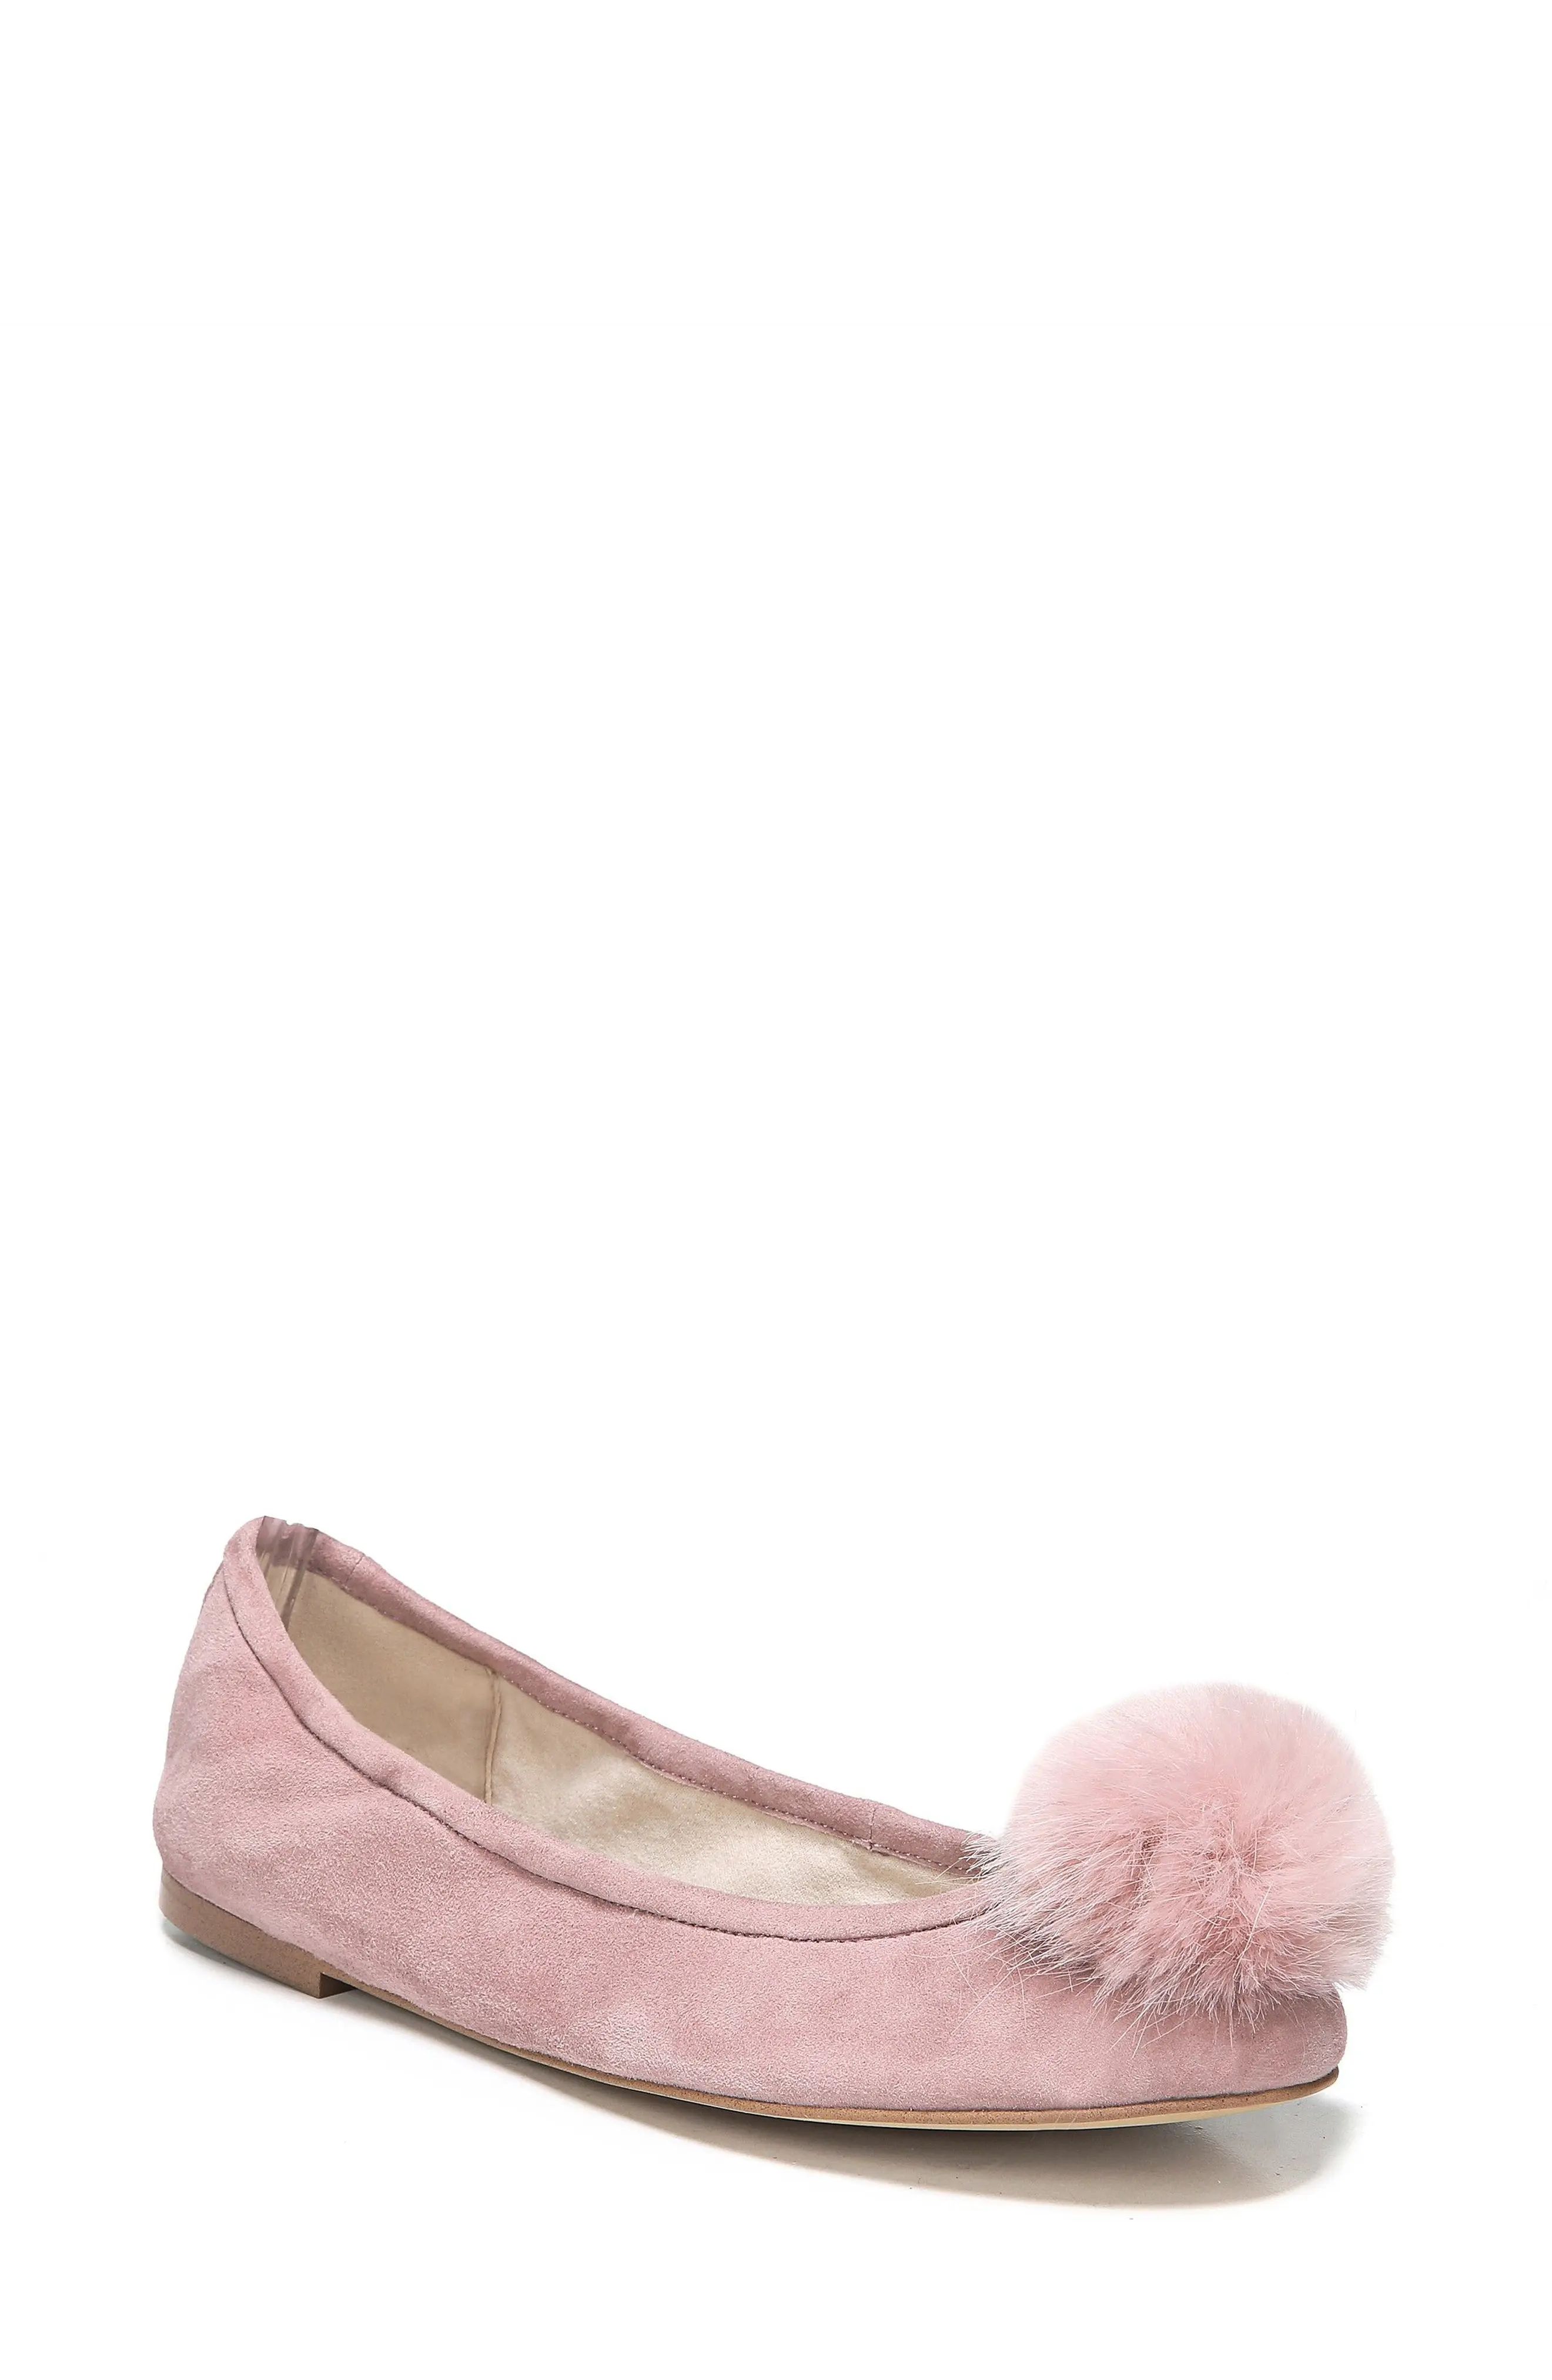 Farina Flat with Faux Fur Pompom | Nordstrom